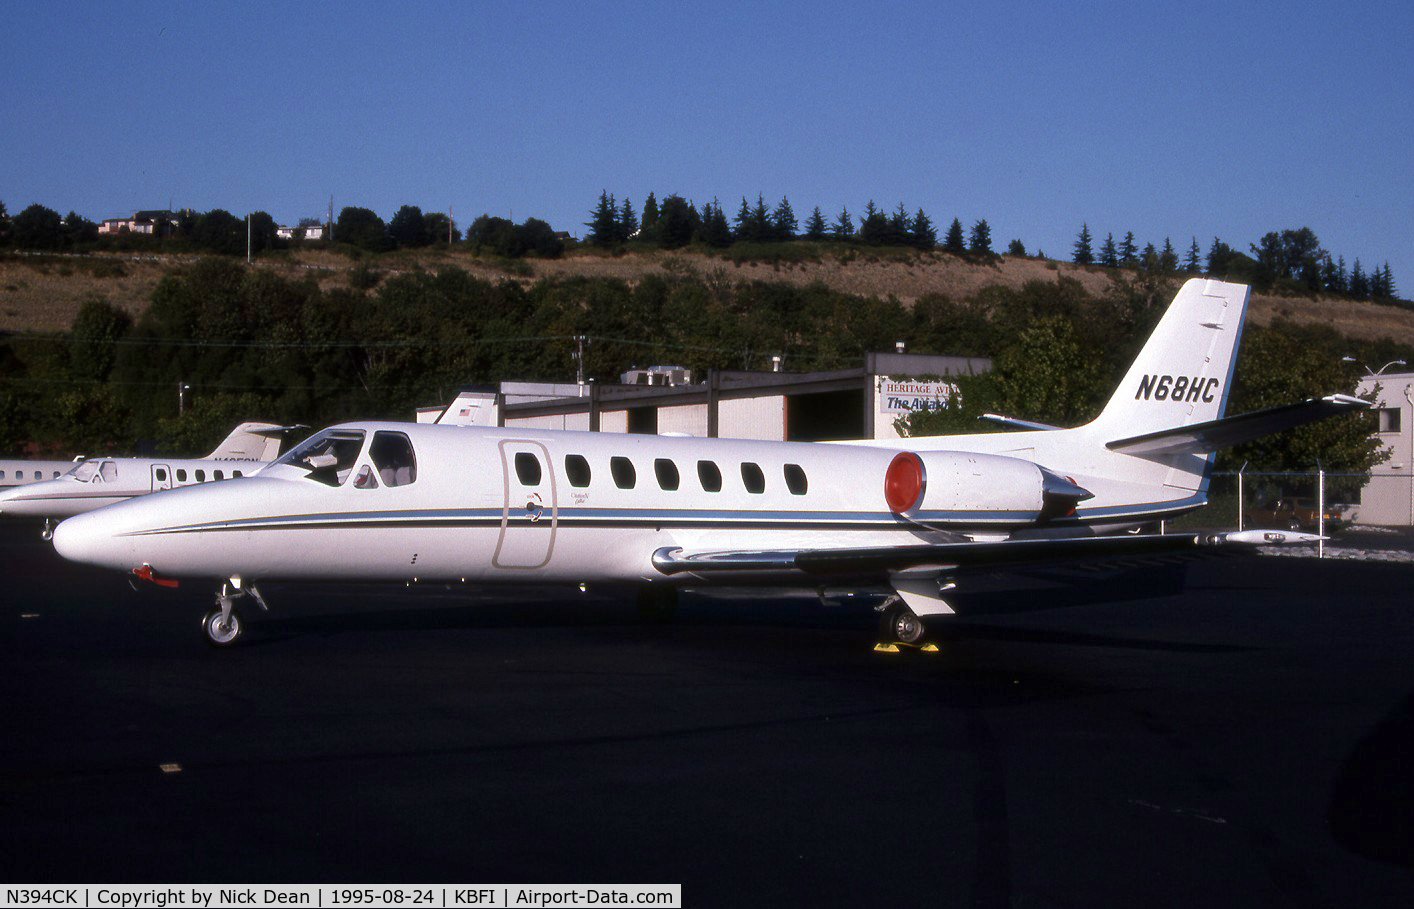 N394CK, 1994 Cessna 560 C/N 560-0270, KBFI (Seen here as N68HC and currently registered N394CK as posted)